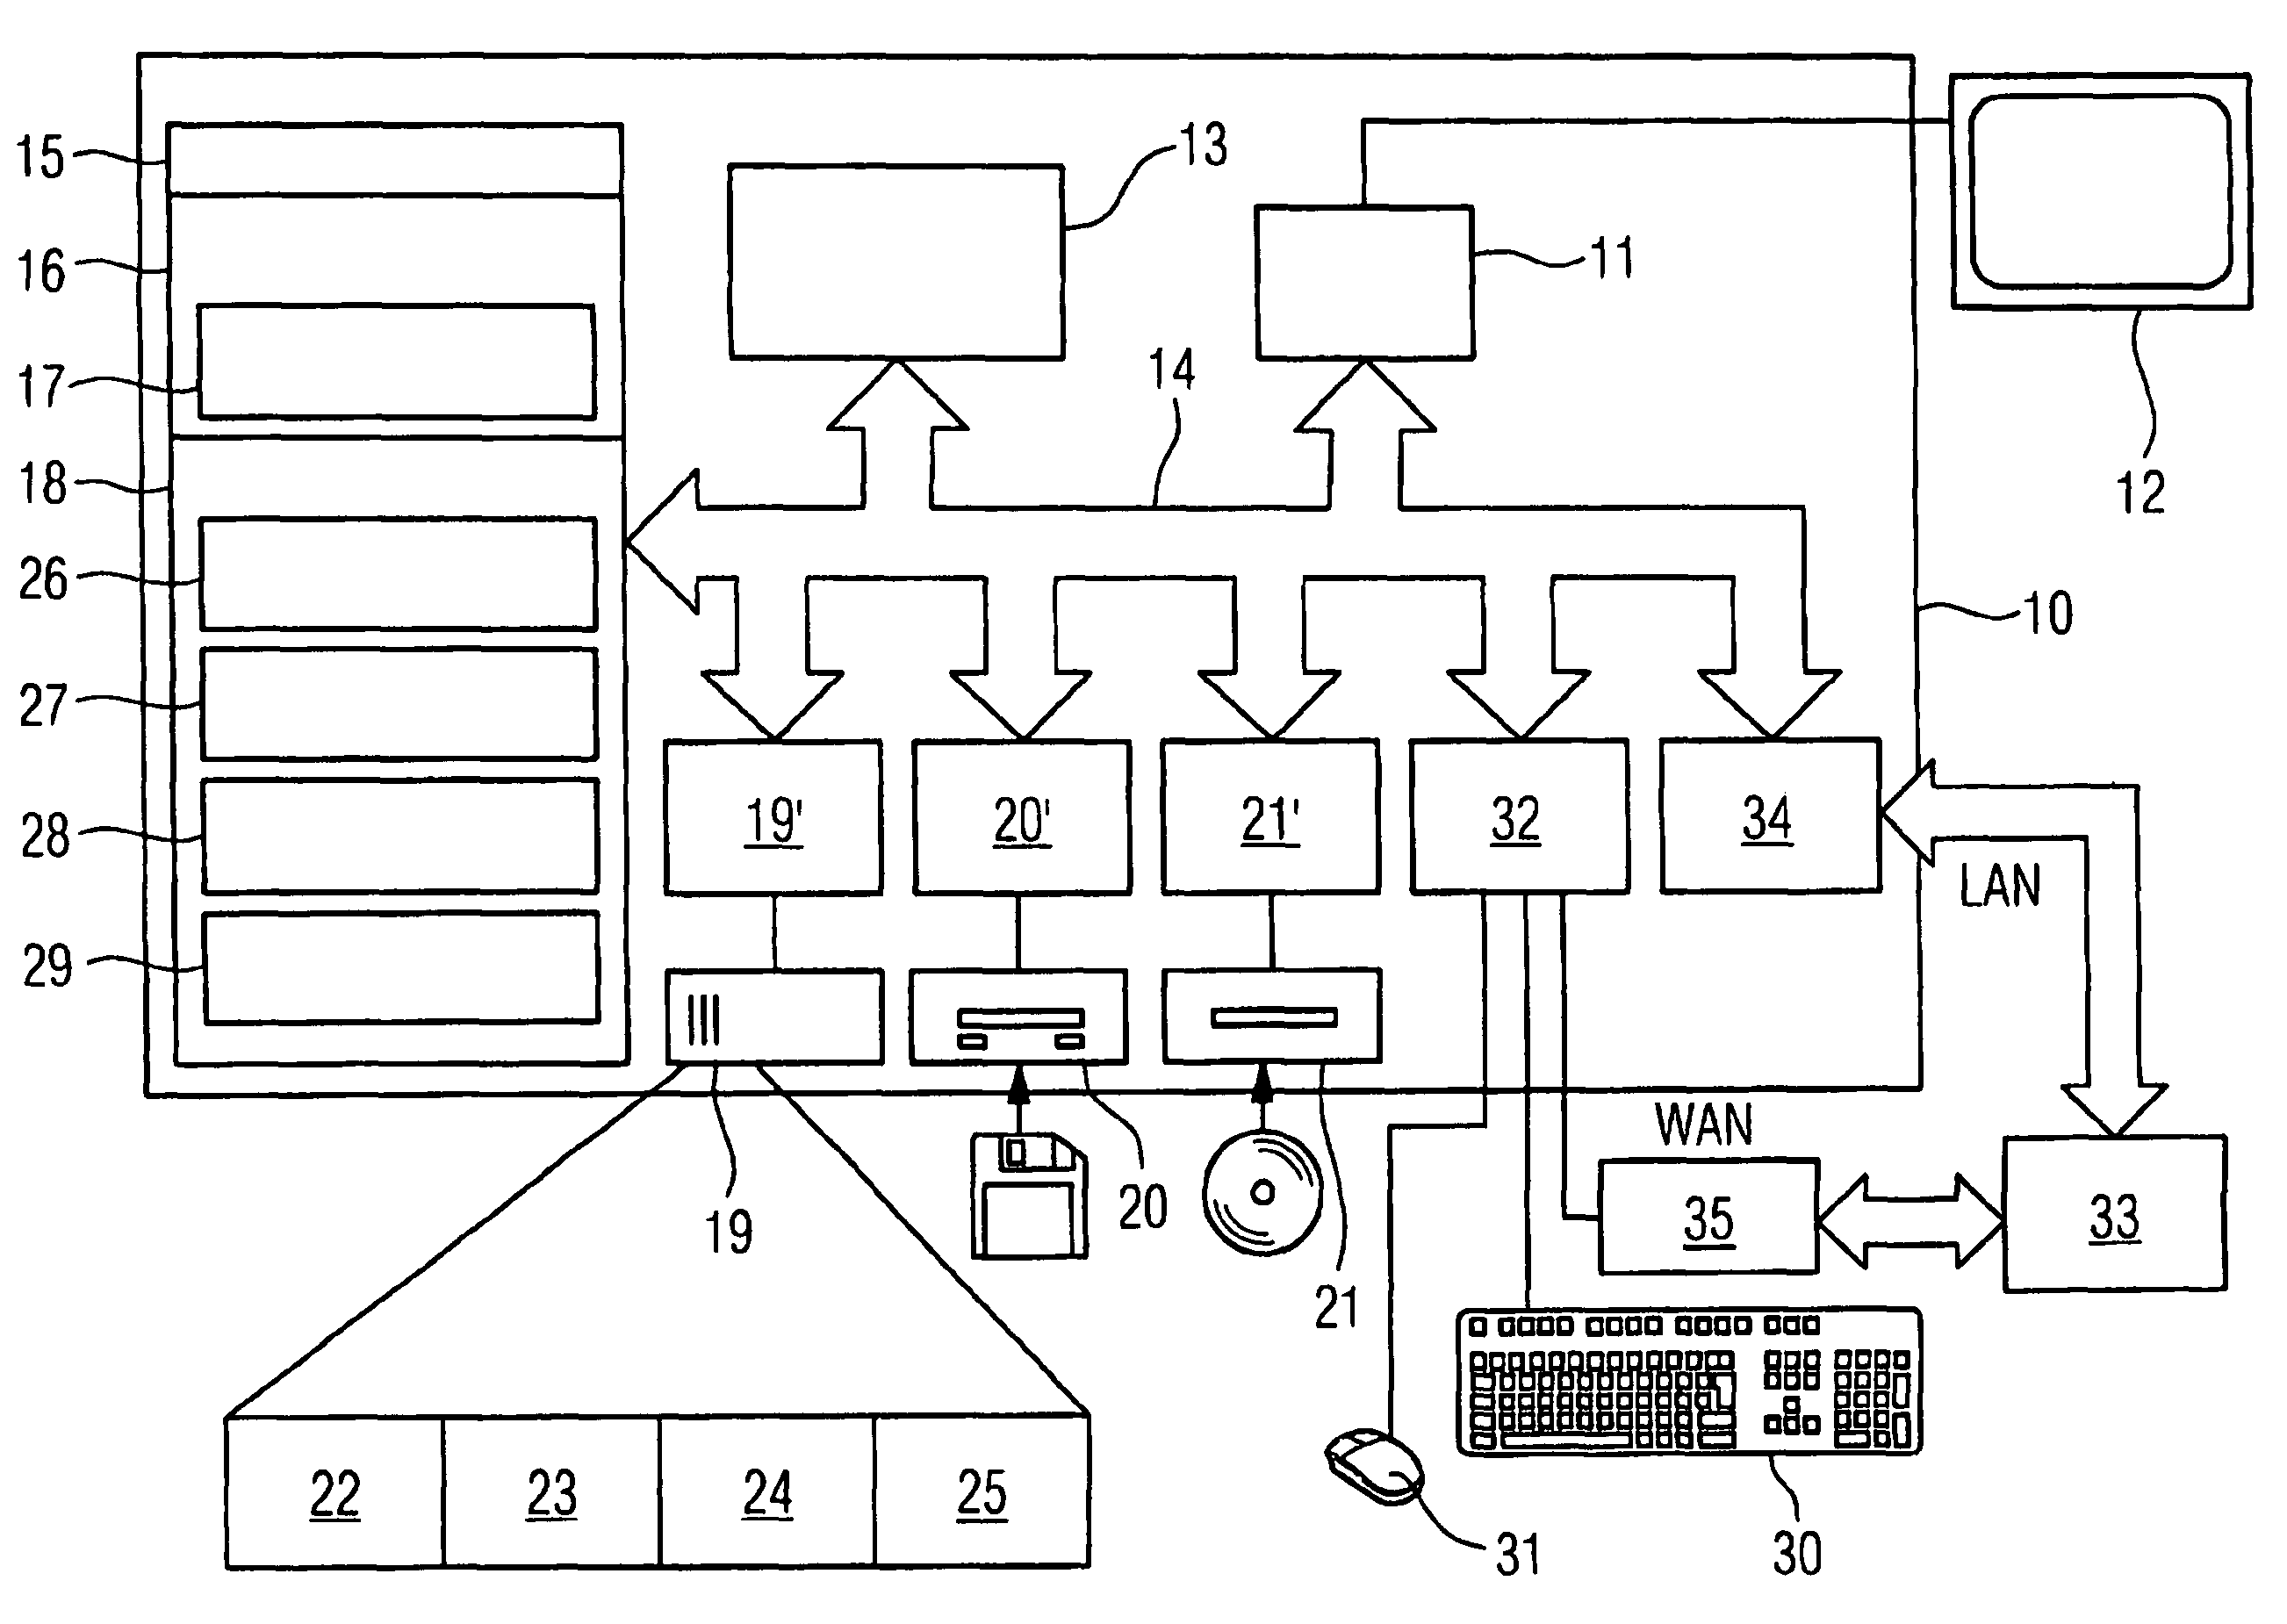 Method for operating industrial installations